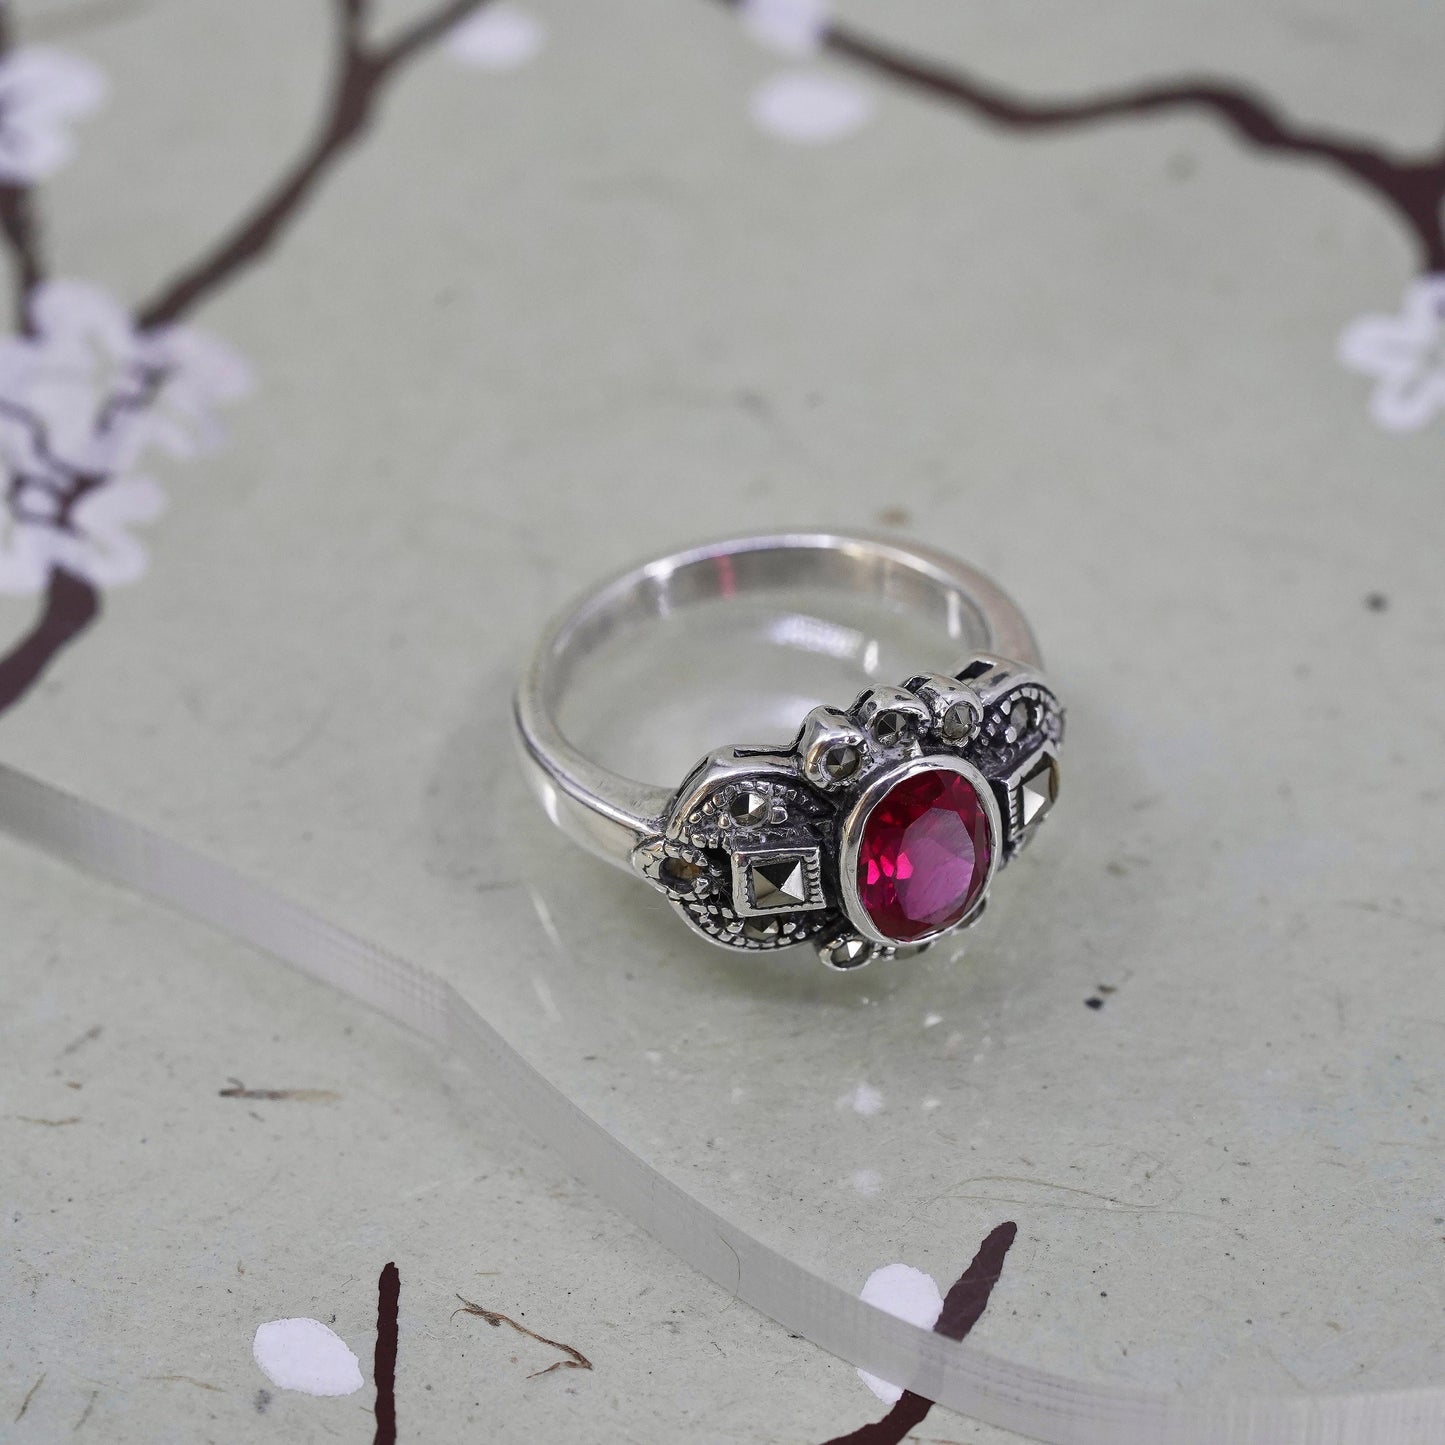 Size 7.5, Vintage Sterling 925 silver handmade ruby ring with marcasite